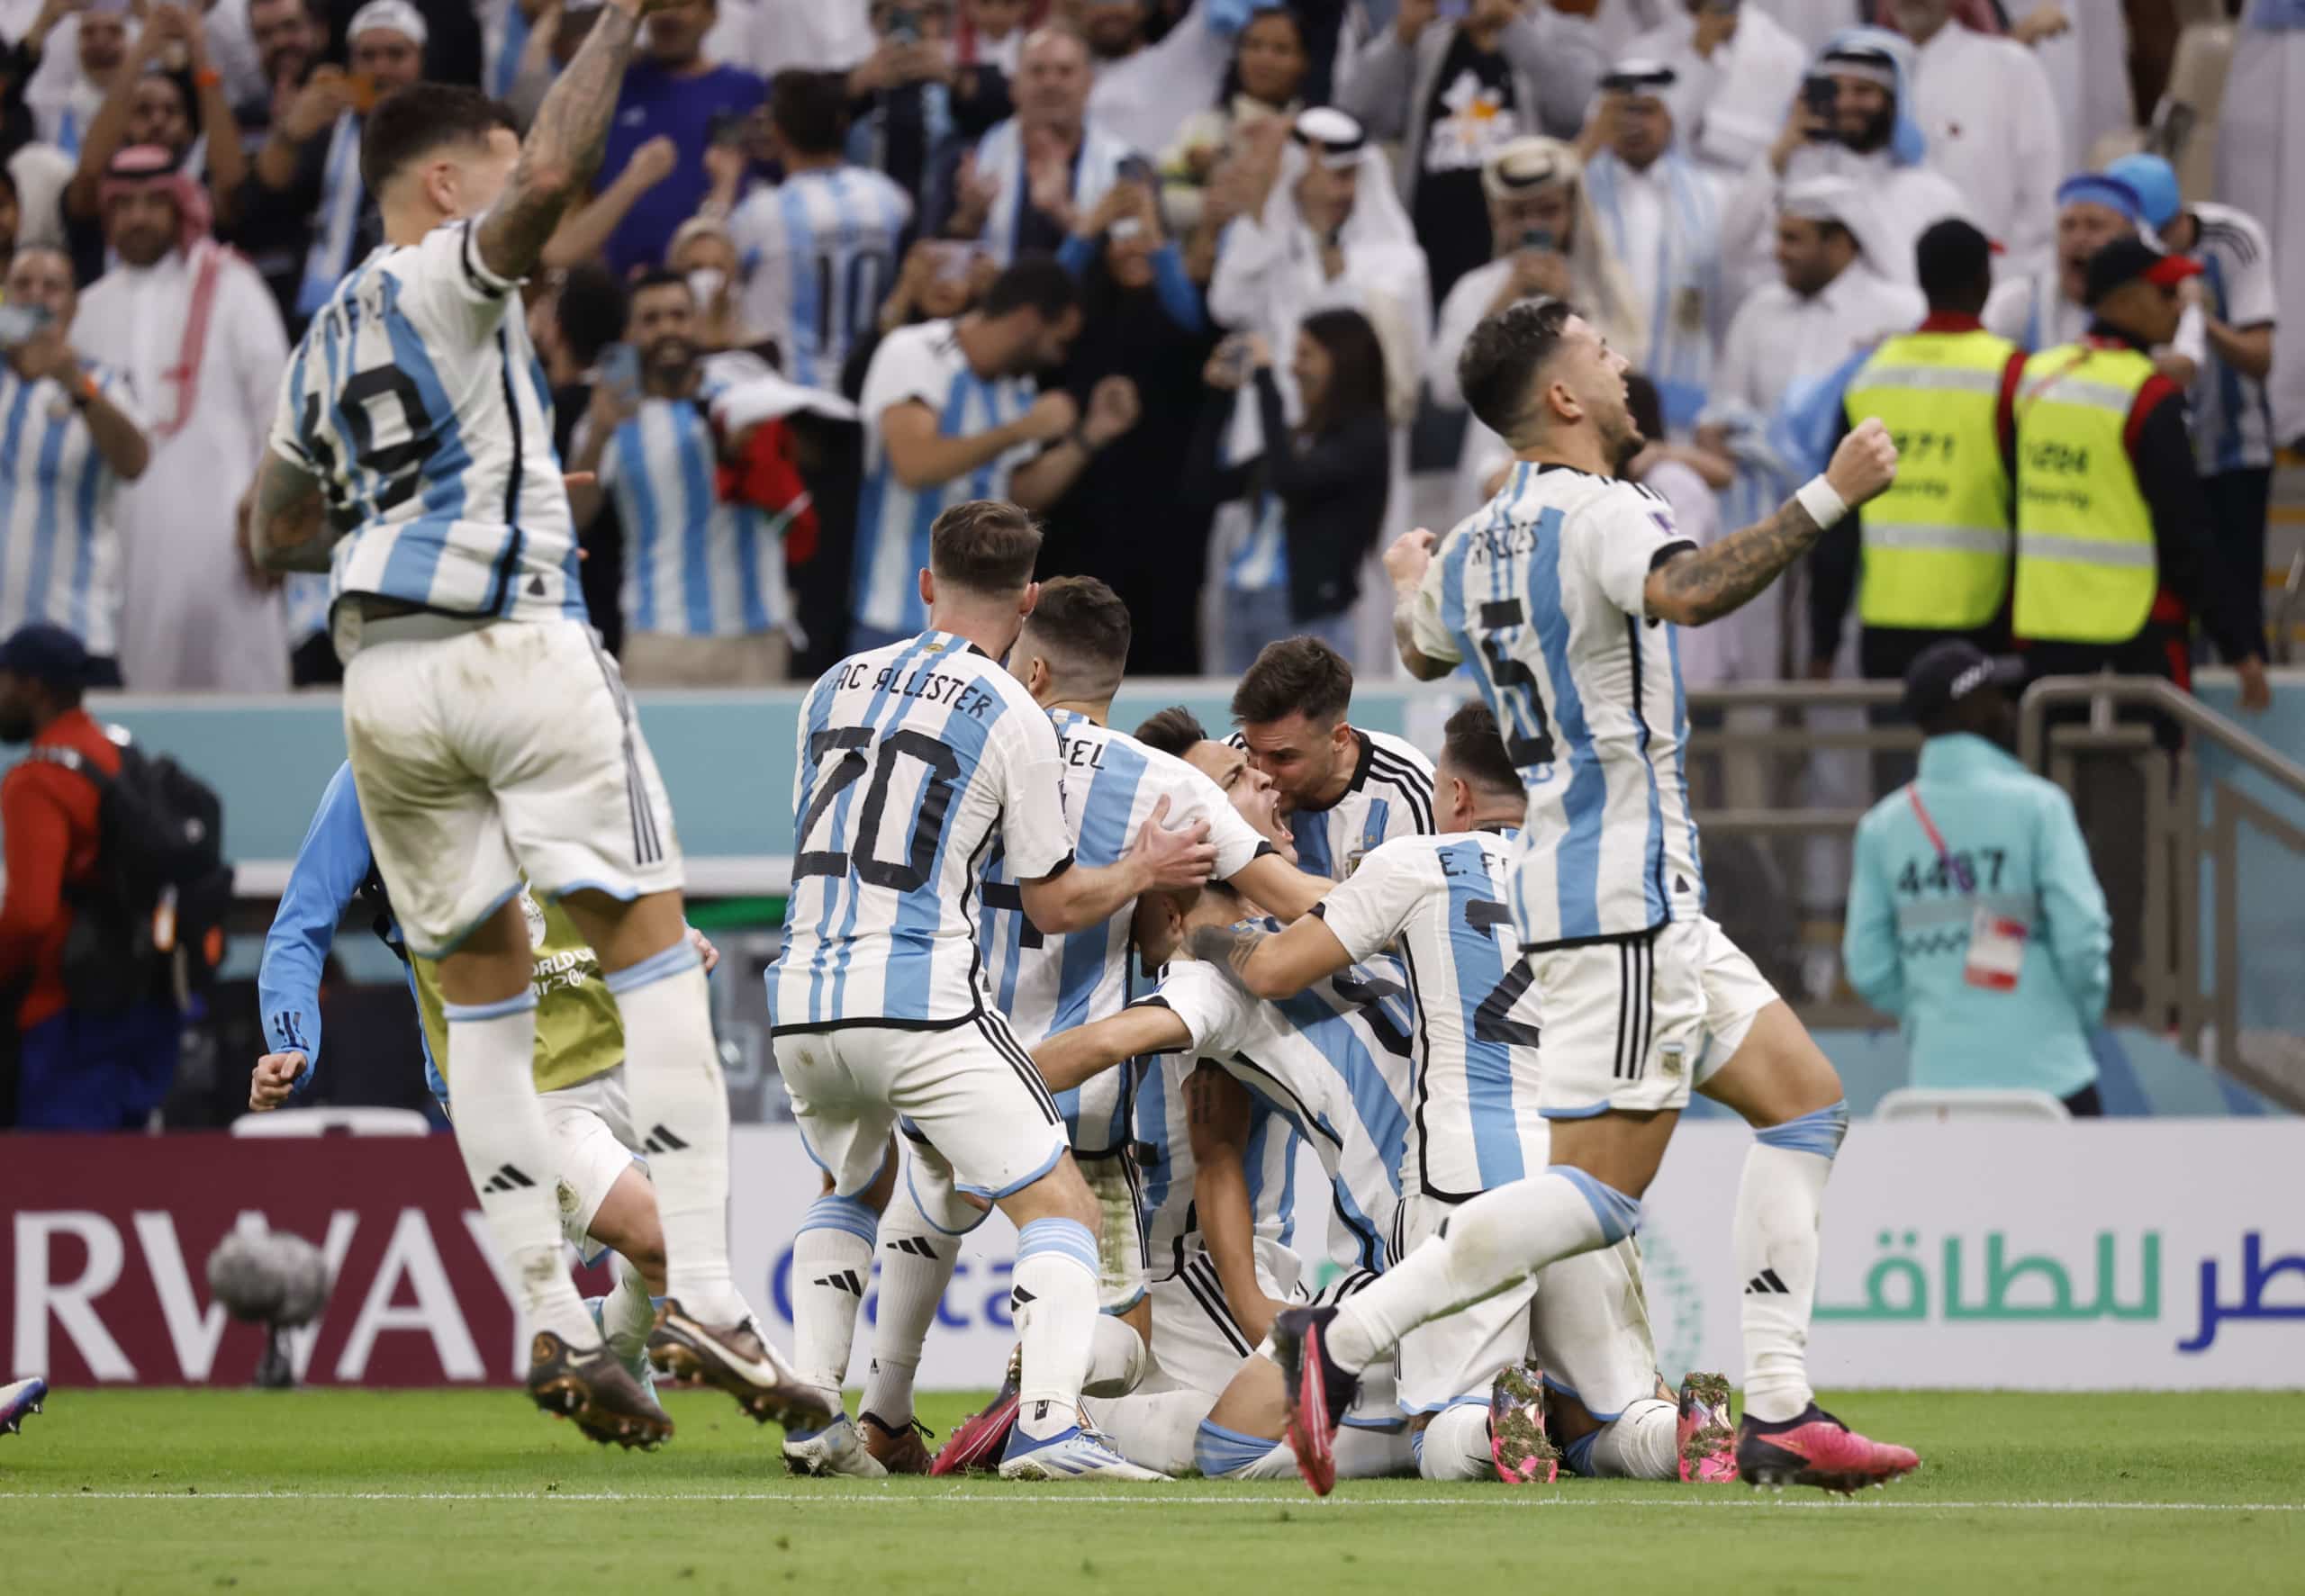 Argentina players celebrate after scoring and advancing in the World Cup knockout round